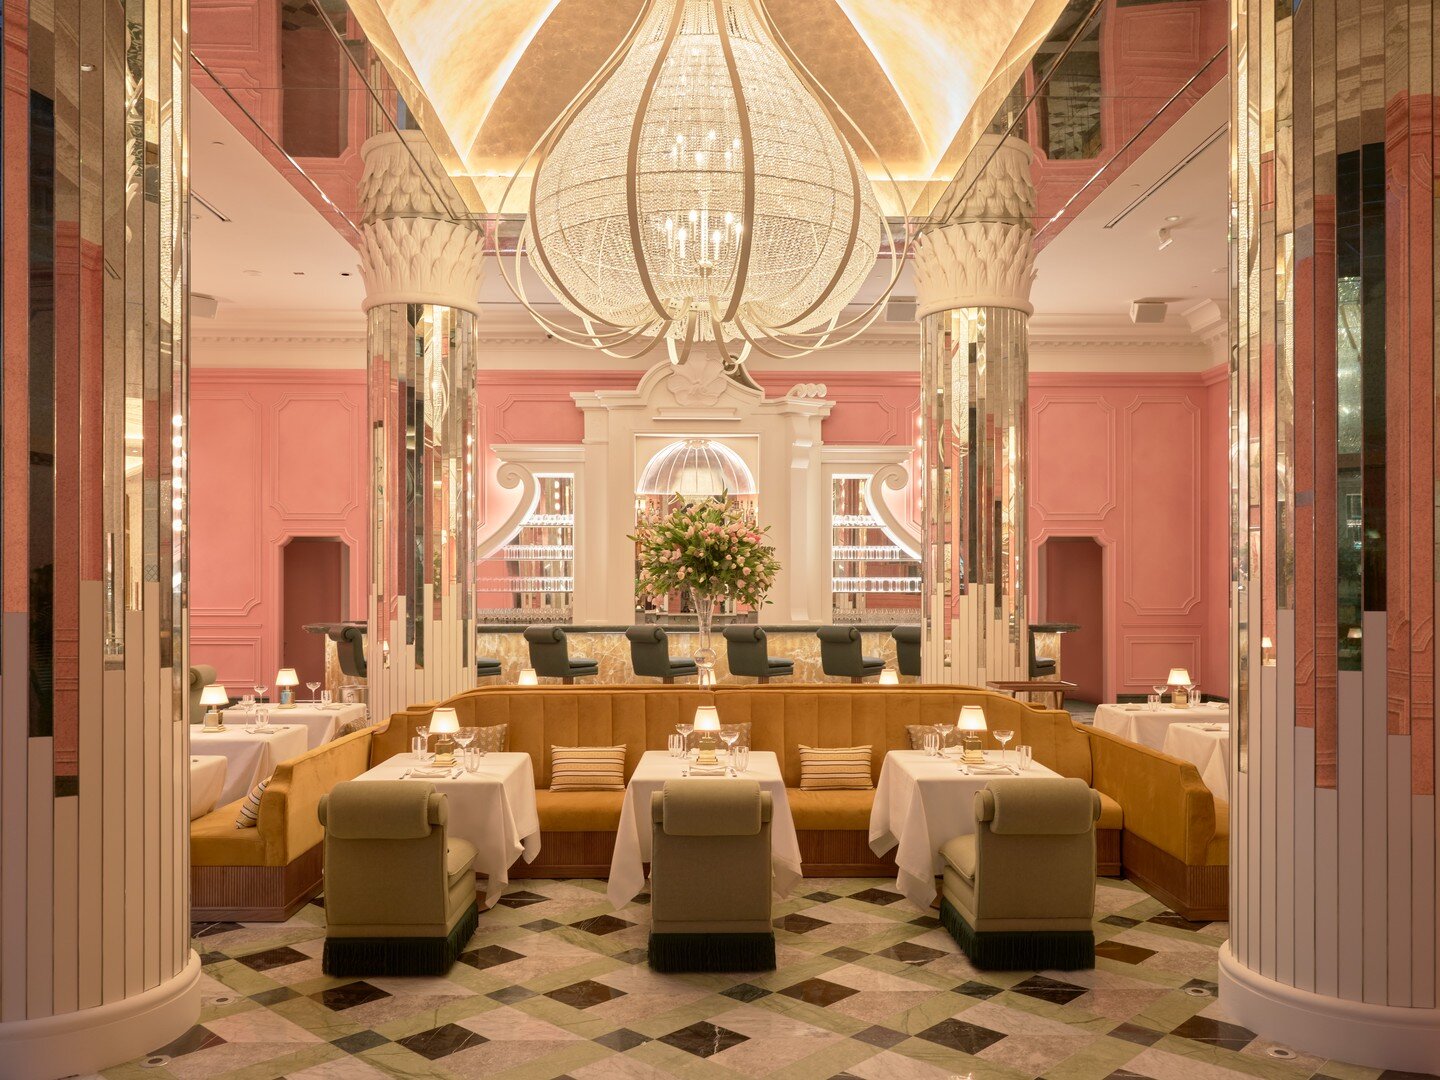 Josette, A revolutionary Parisian dining concept with an elevated menu, bespoke beverage program, impressive d&eacute;cor, and spectacular entertainment.

With interiors designed by visionary artist Luke Edward Hall, Josette is a dining experience un